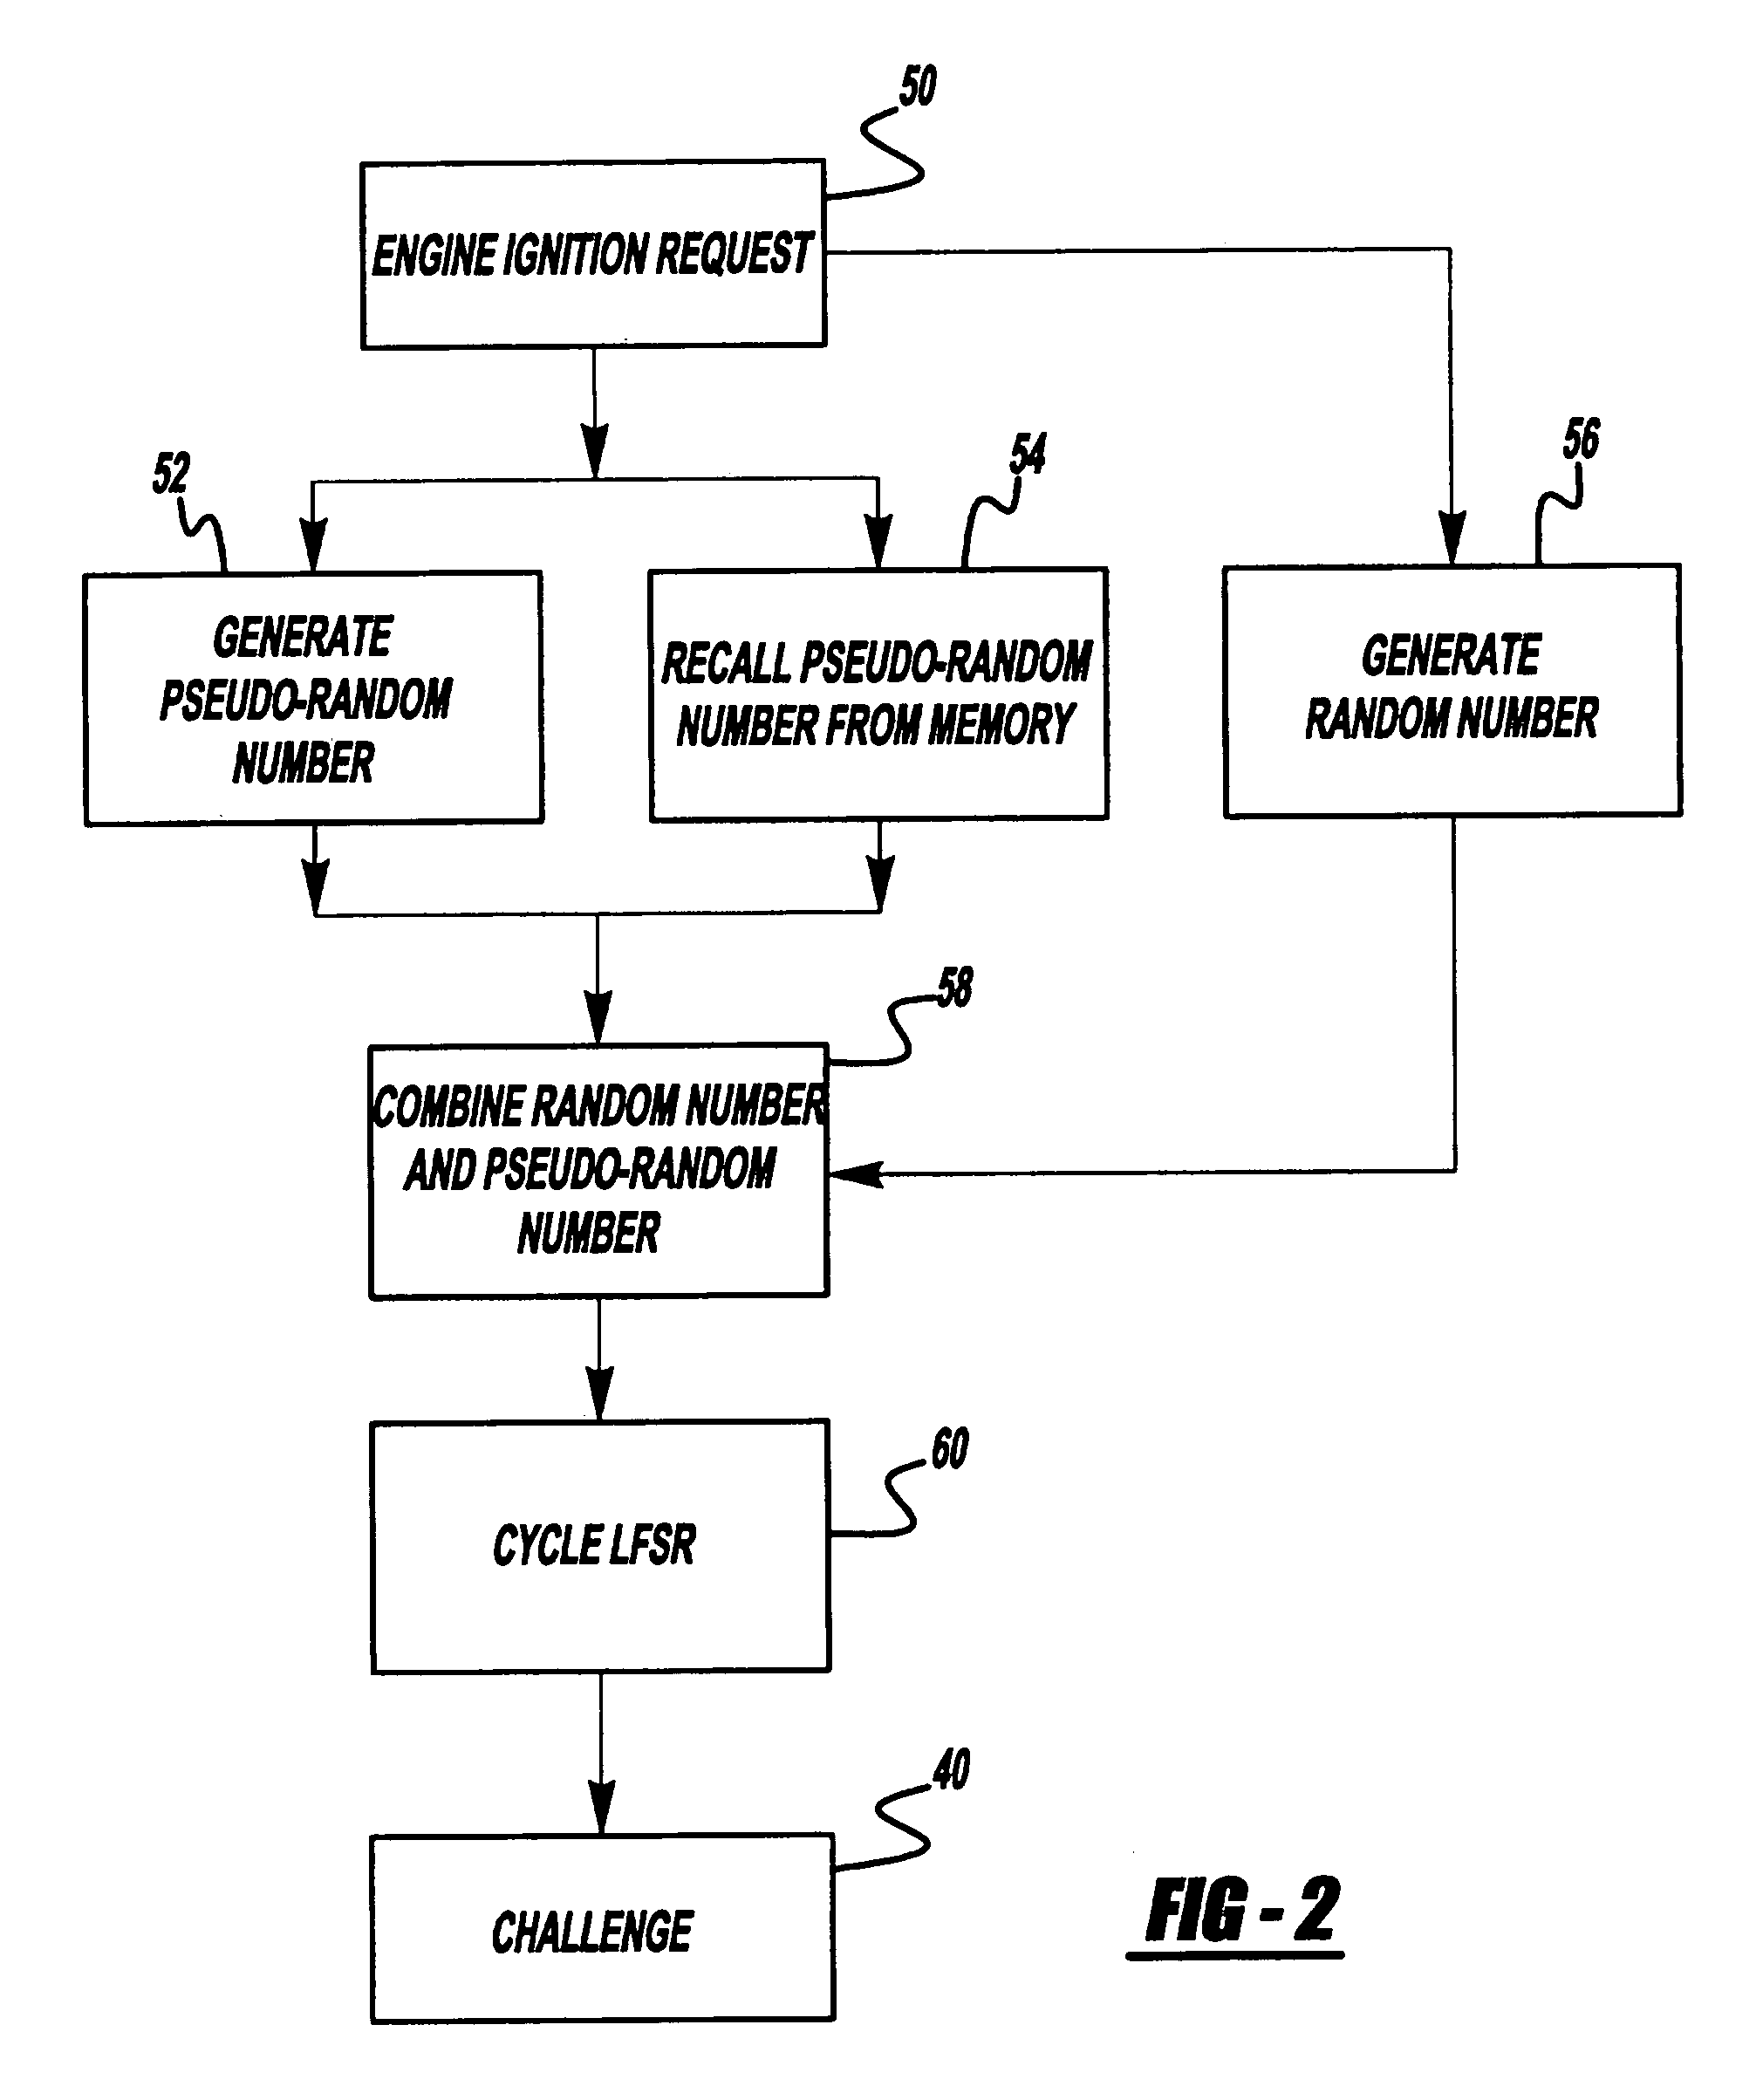 Motor vehicle engine immobilizer security system and method